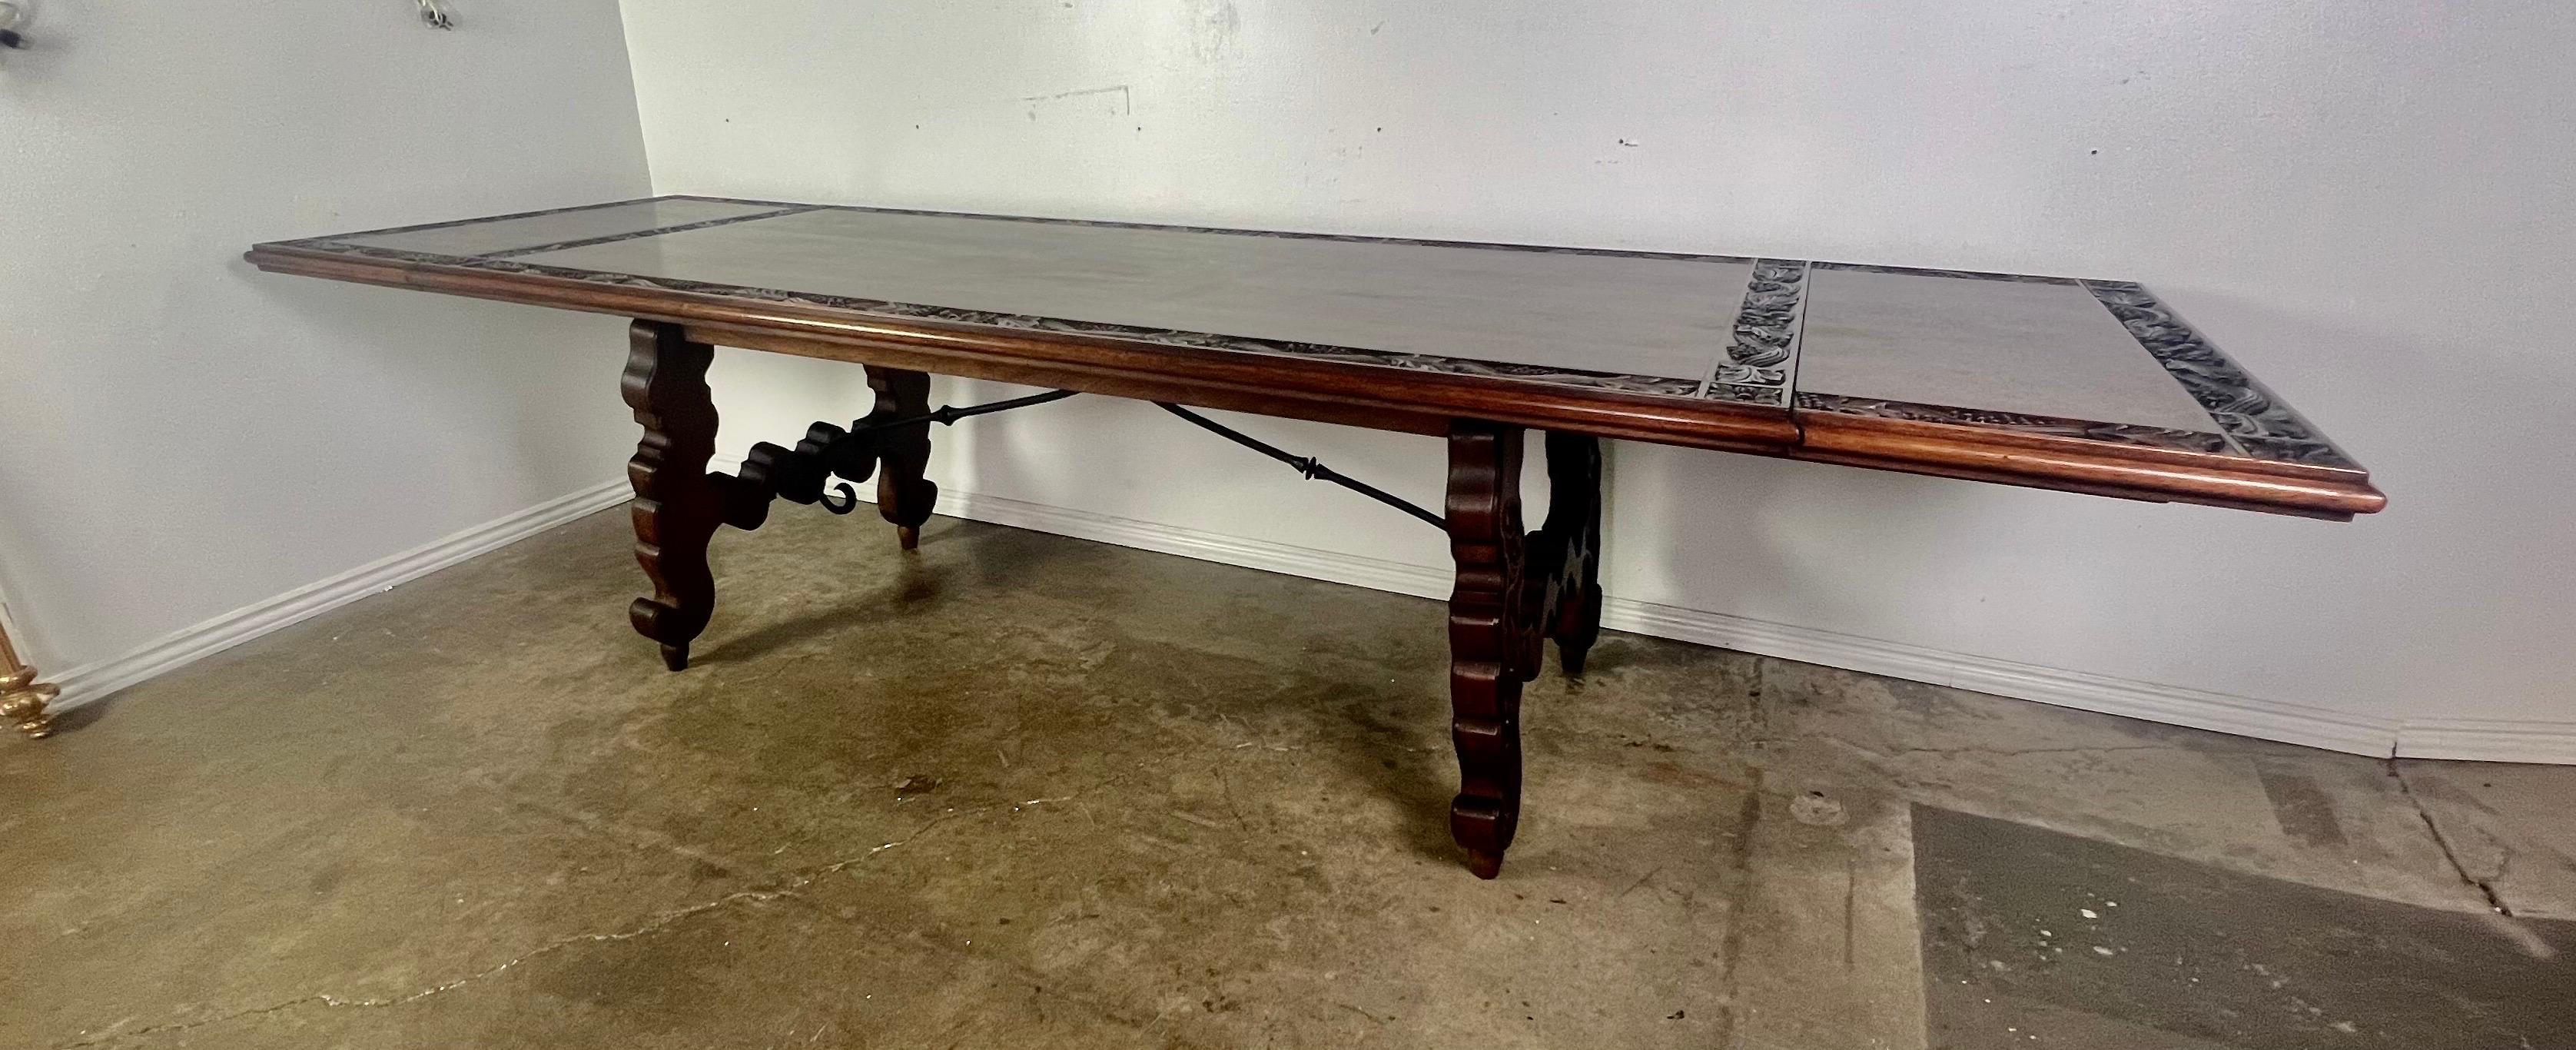 Early 20th Century Spanish Refractory Dining Table with Leaves For Sale 2